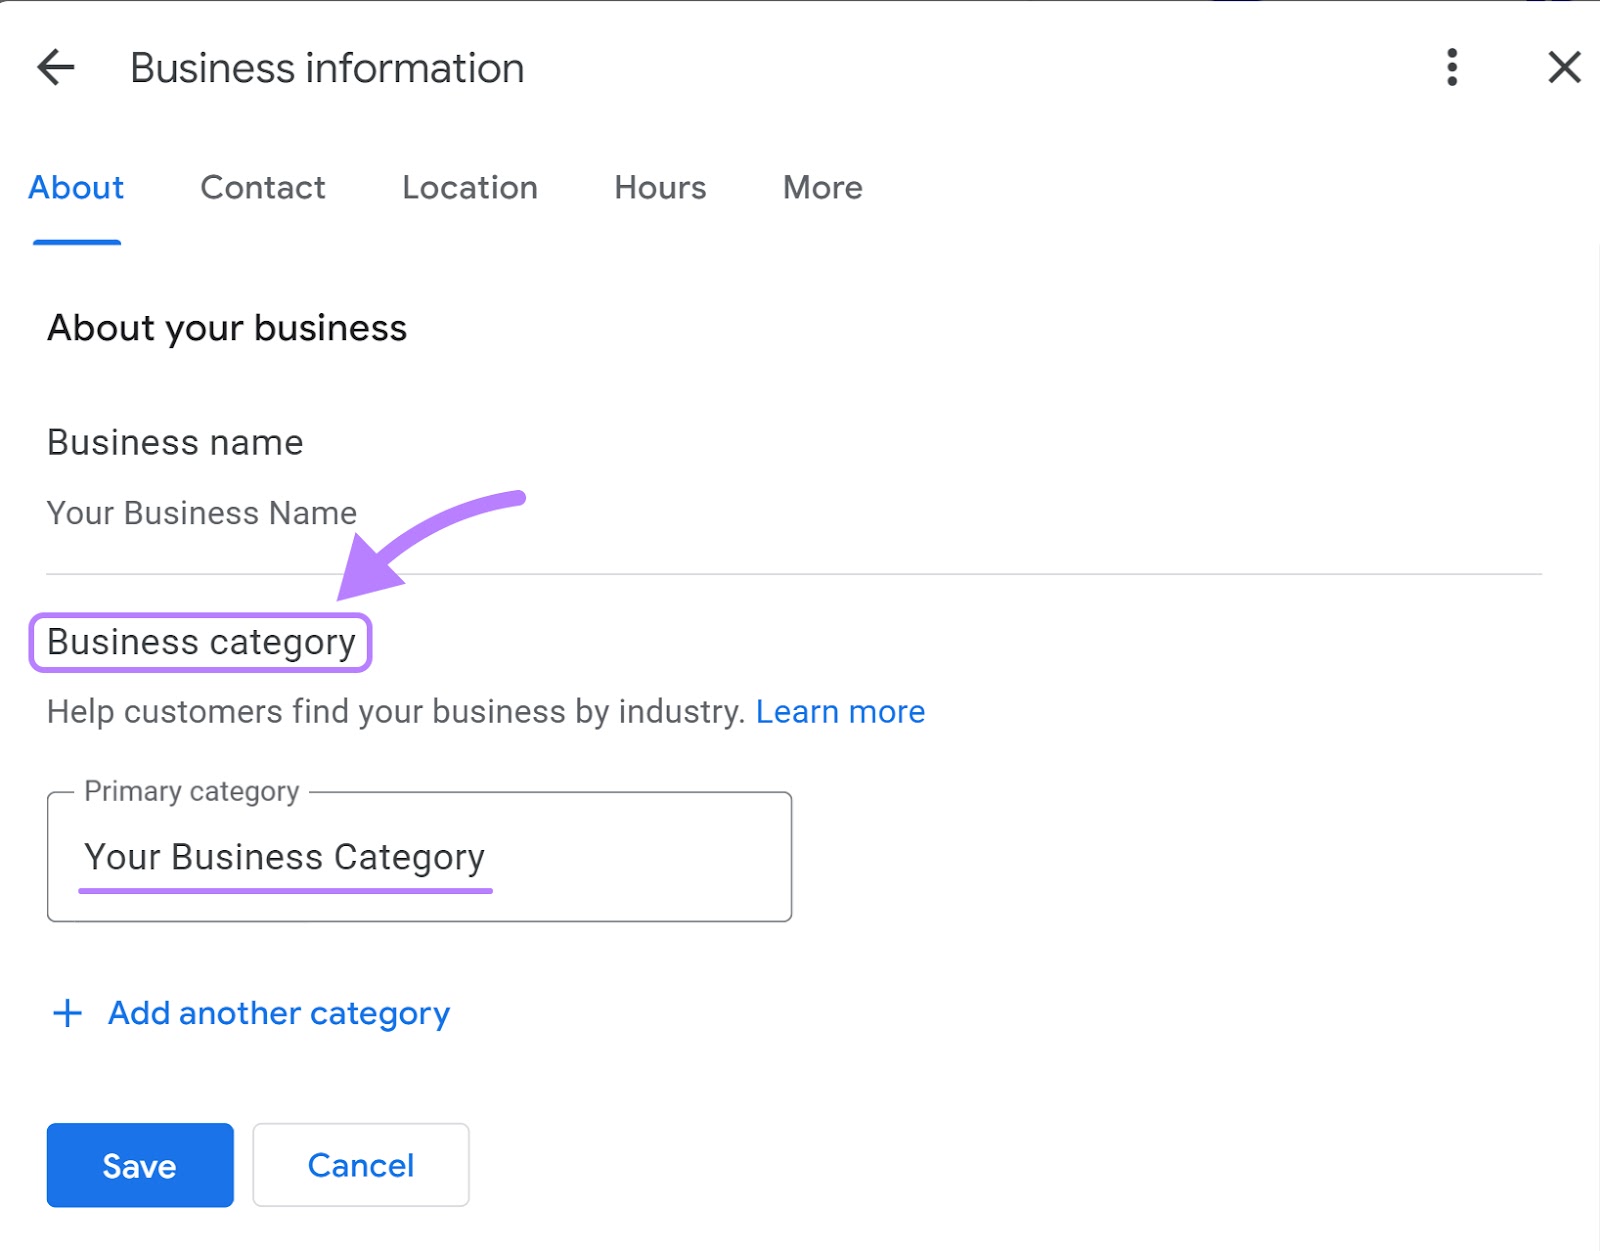 "Business category" conception  highlighted nether  "Business information" page